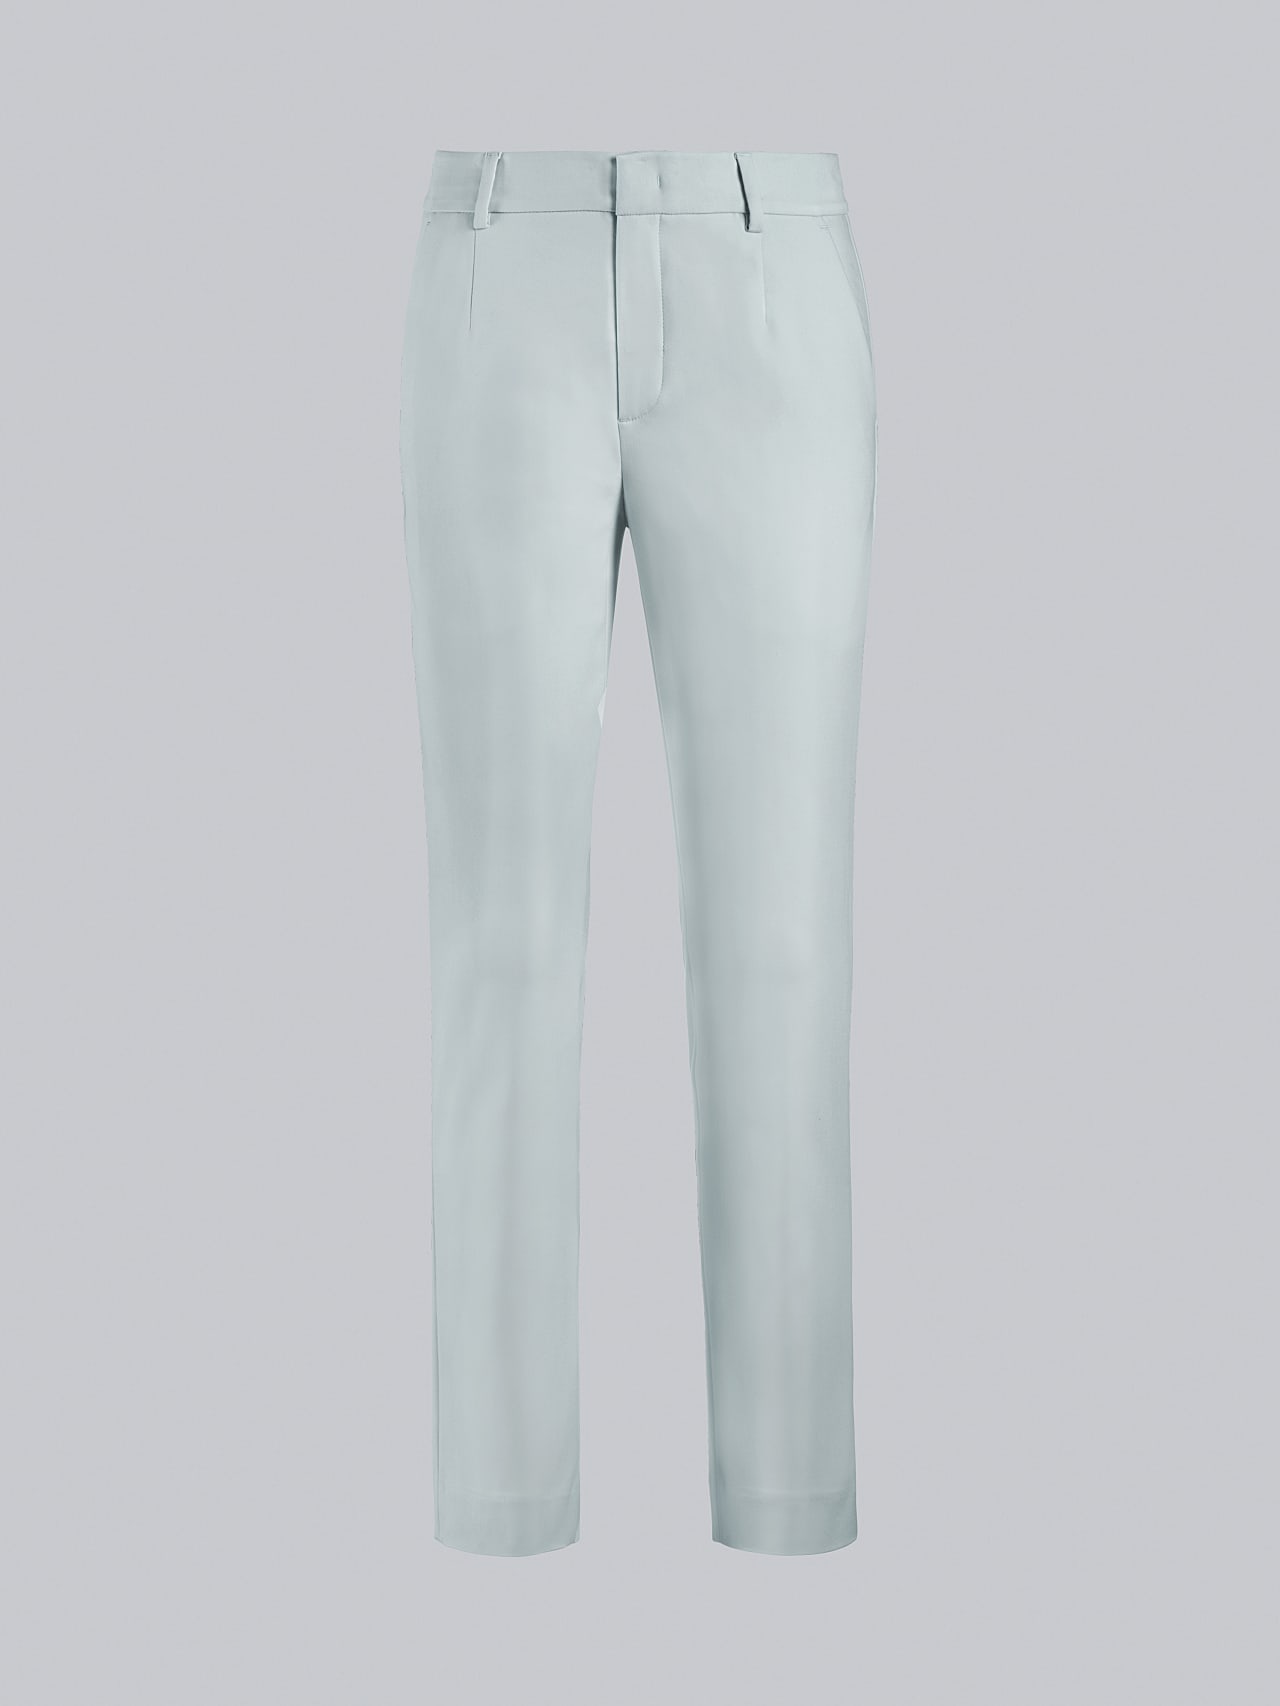 AlphaTauri | PERTI V1.Y5.02 | Slim-Fit Tapered Pants in Pale Blue  for Women